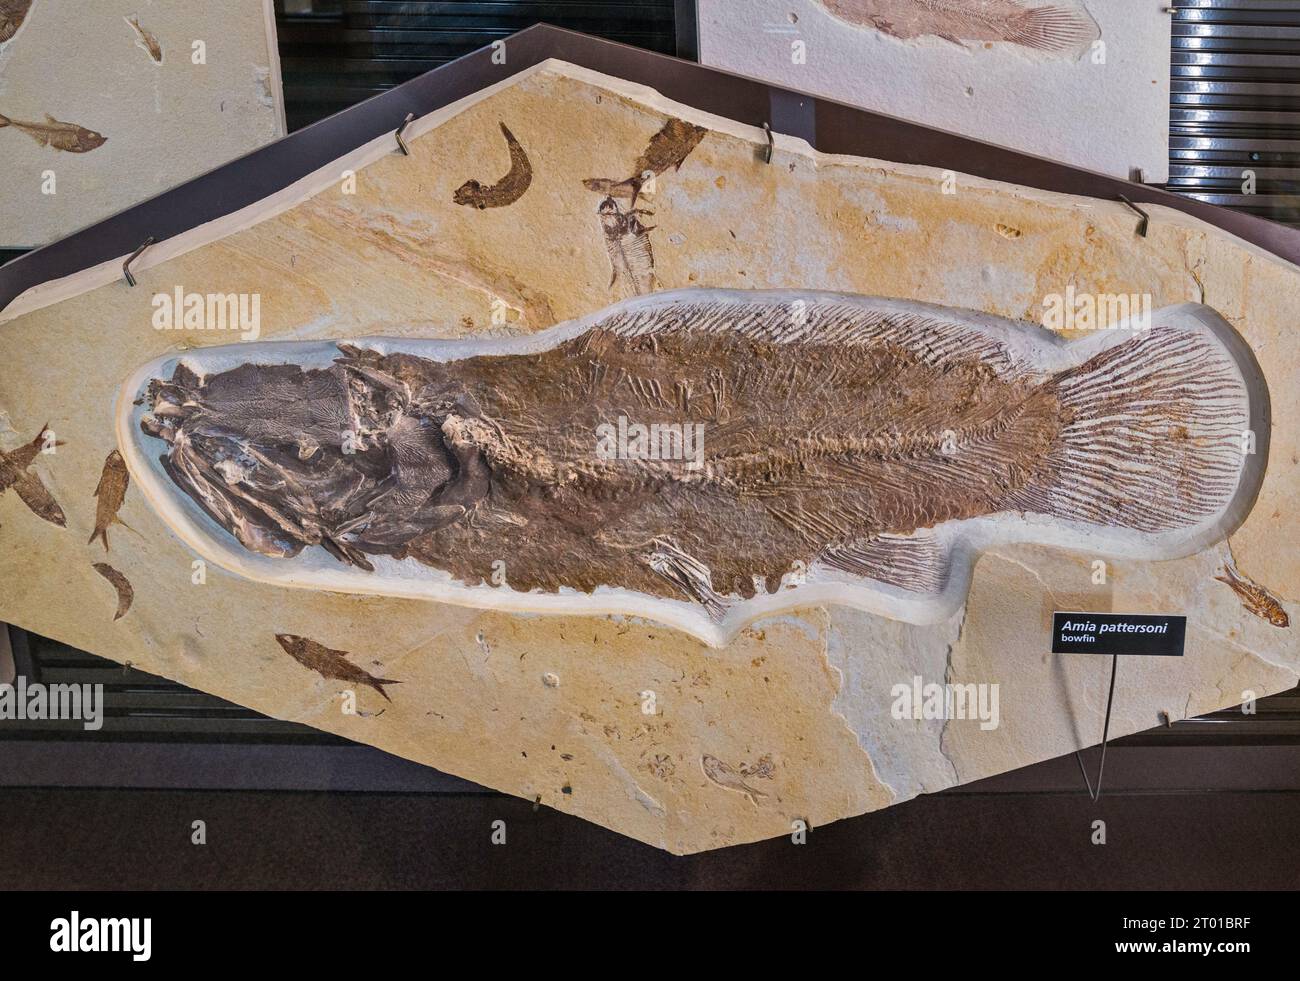 Amia pattersoni, extinct fish, fossil exhibit on display at visitor center at Fossil Butte National Monument, Wyoming, USA Stock Photo